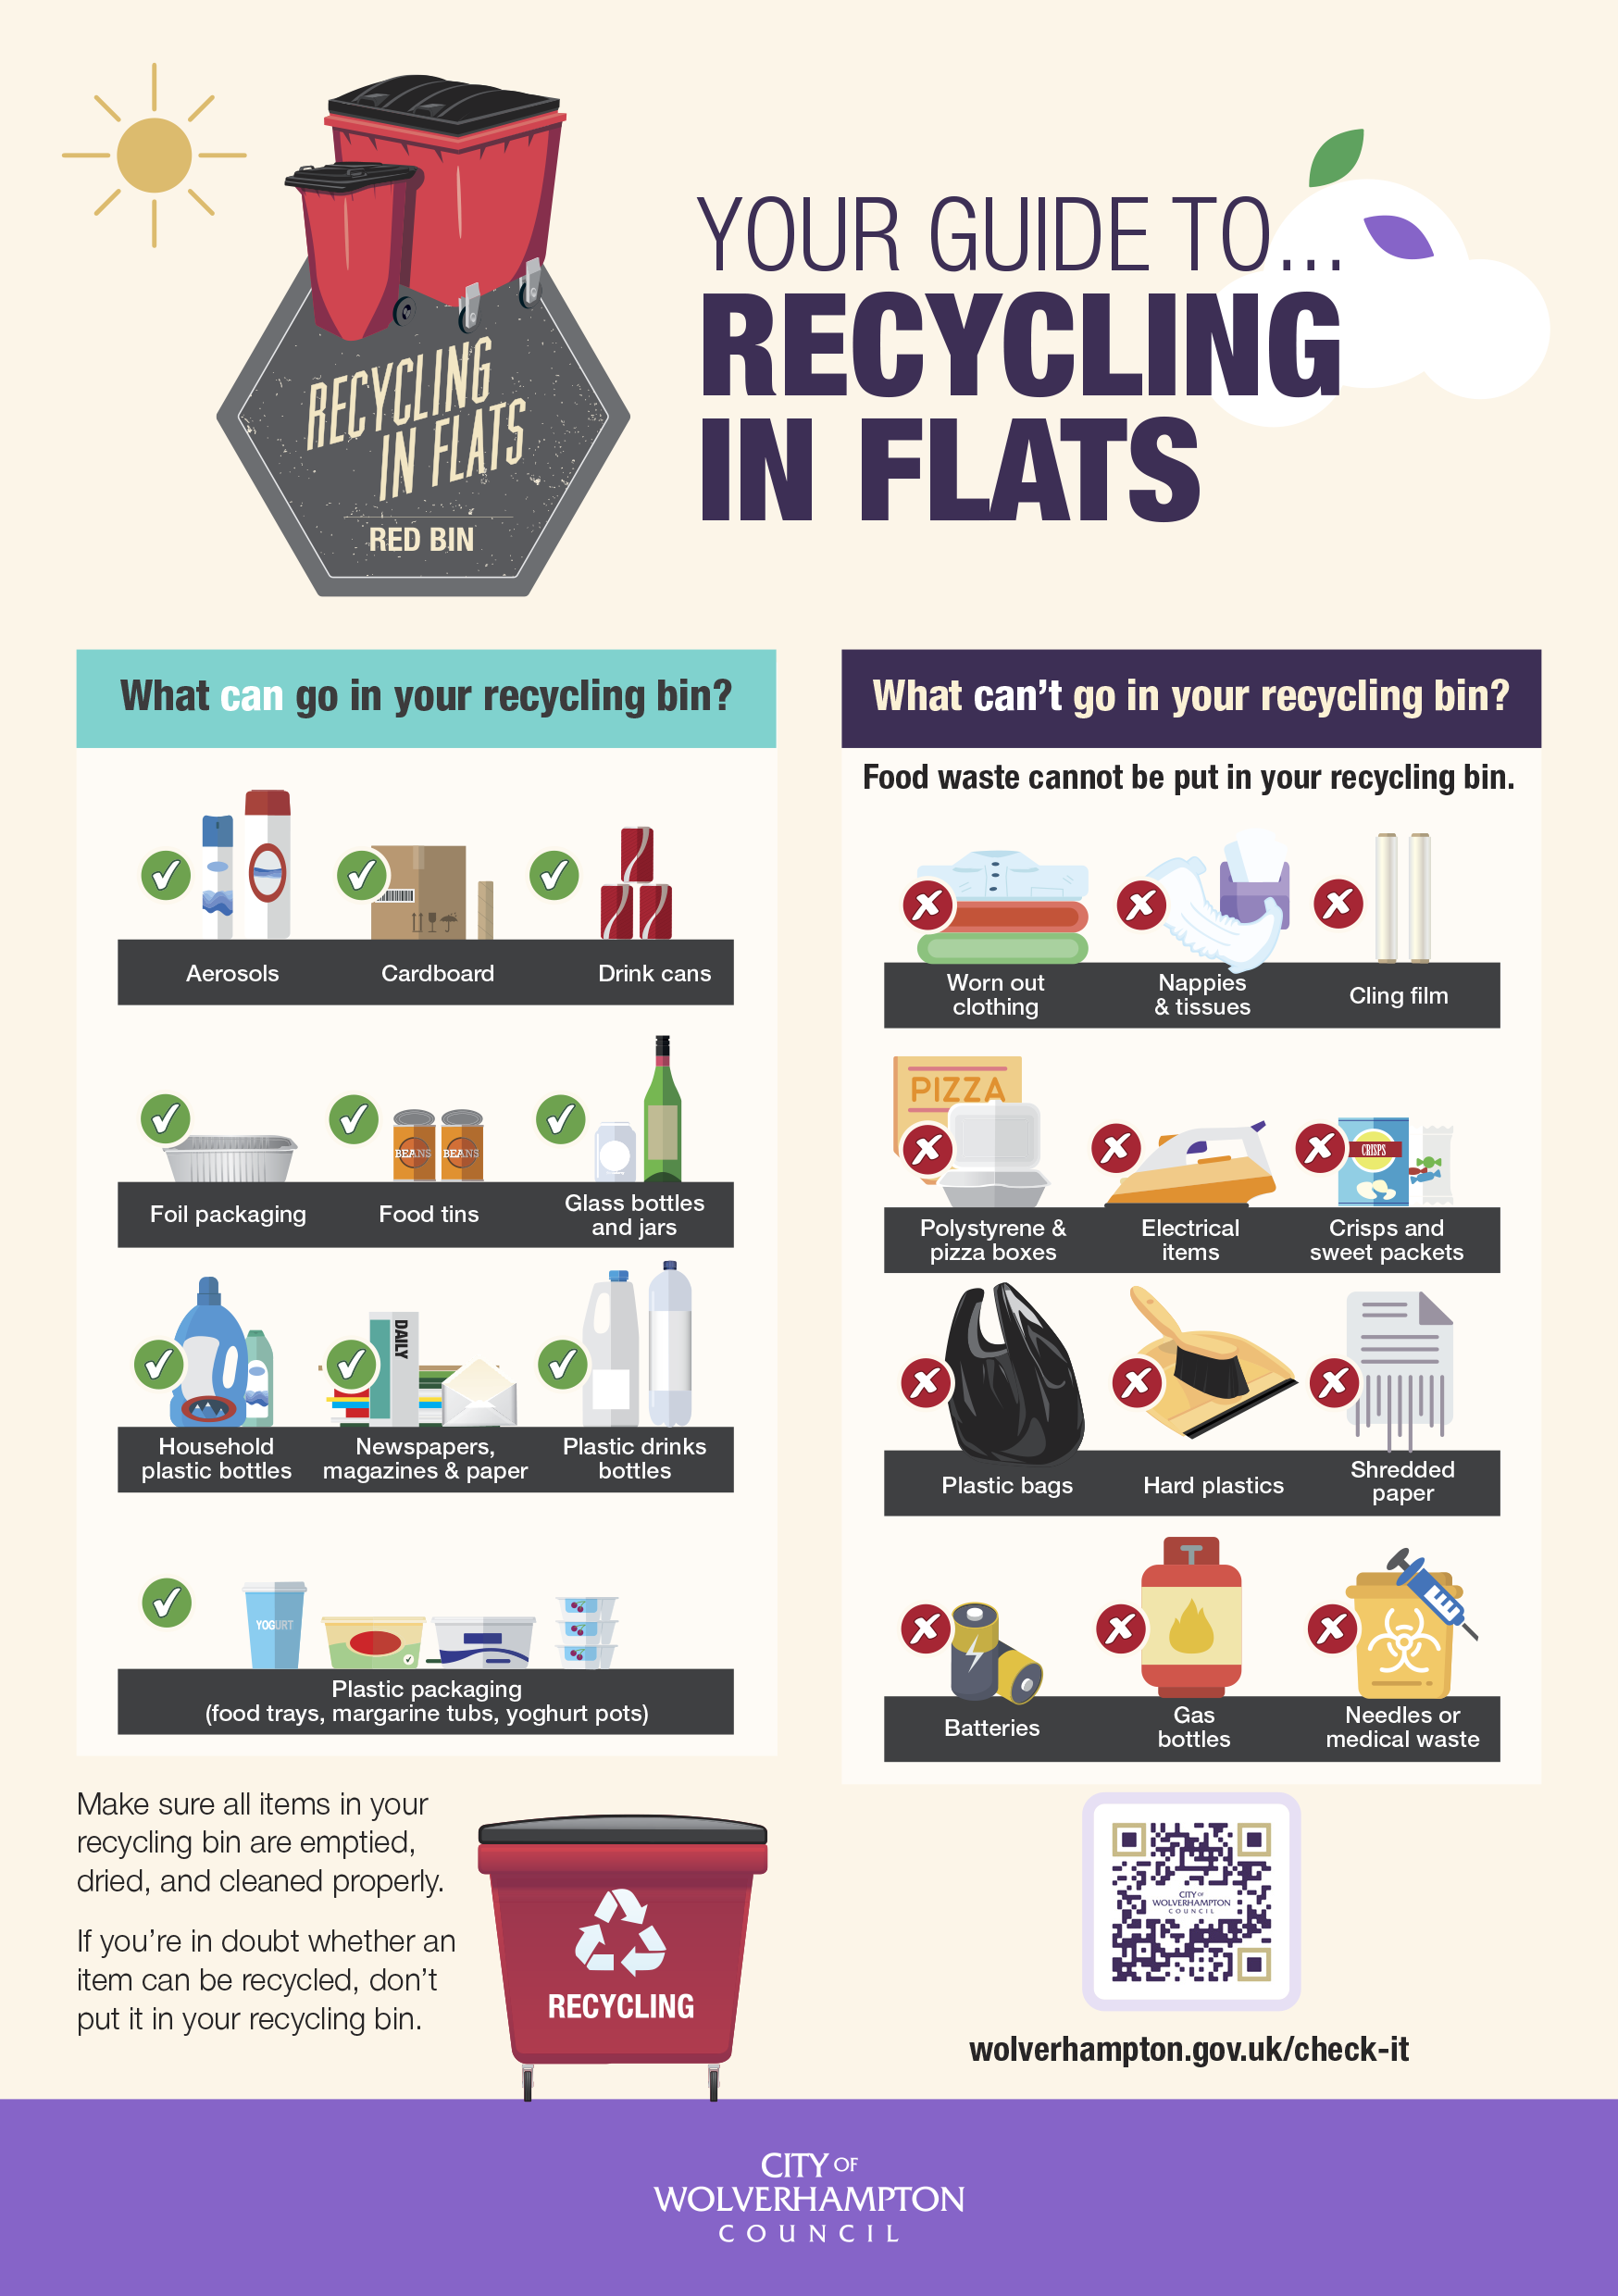 Poster outlines items which can and can not going into recycling bins when living in flats